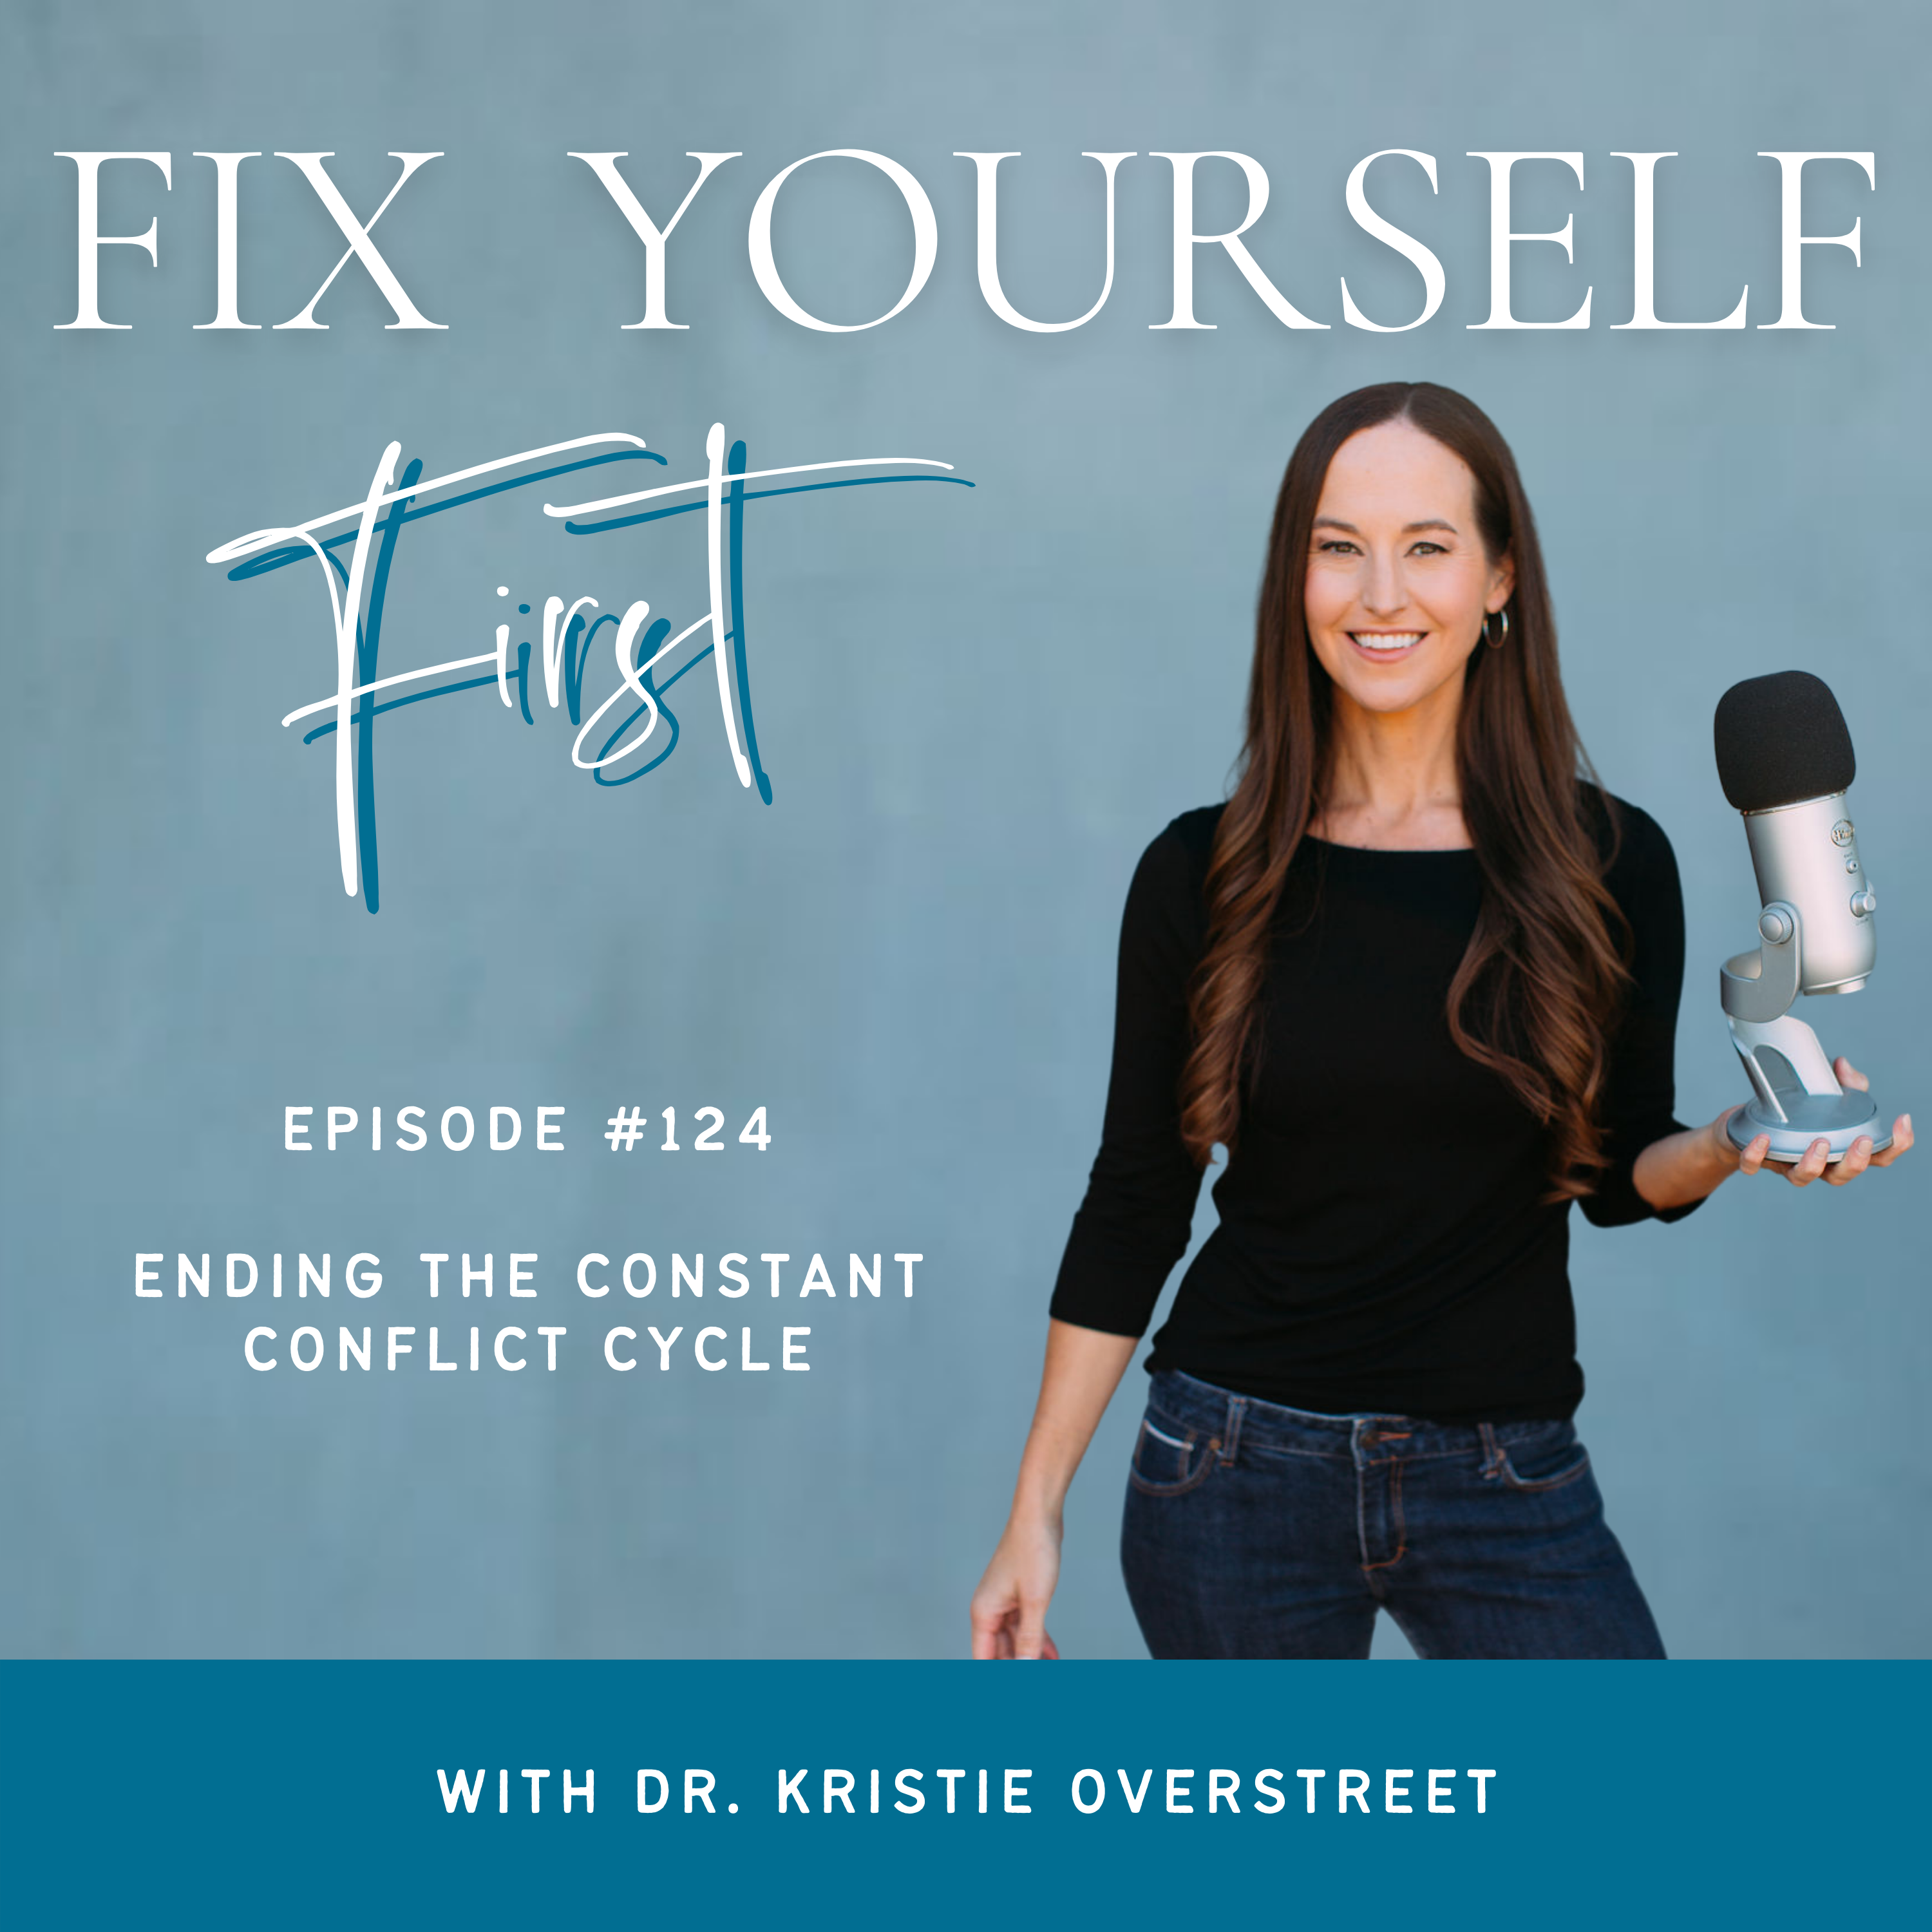 Fix Yourself First Episode 124 Ending the Constant Conflict Cycle